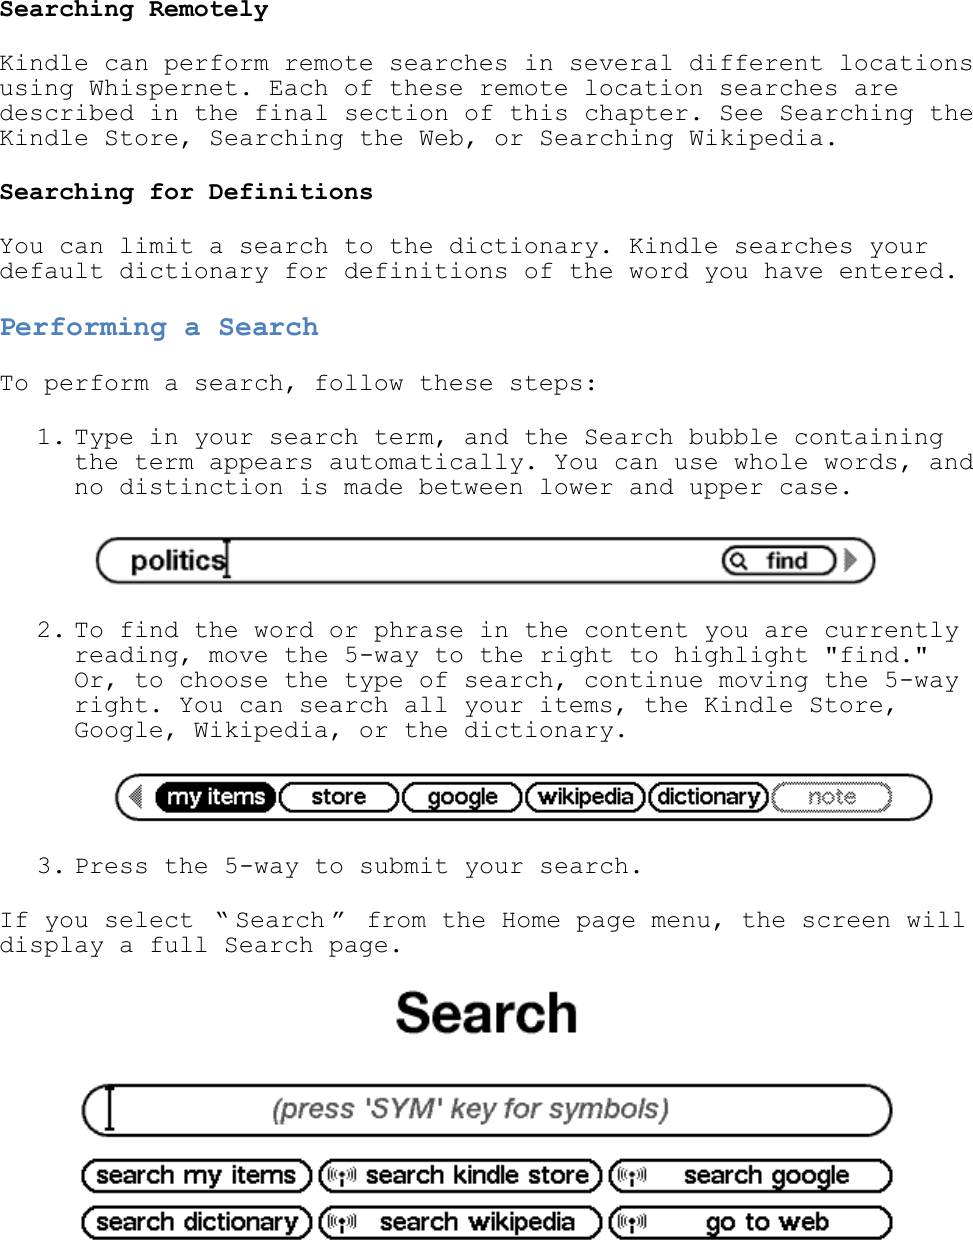   Searching Remotely Kindle can perform remote searches in several different locations using Whispernet. Each of these remote location searches are described in the final section of this chapter. See Searching the Kindle Store, Searching the Web, or Searching Wikipedia. Searching for Definitions You can limit a search to the dictionary. Kindle searches your default dictionary for definitions of the word you have entered. Performing a Search To perform a search, follow these steps: 1. Type in your search term, and the Search bubble containing the term appears automatically. You can use whole words, and no distinction is made between lower and upper case.   2. To find the word or phrase in the content you are currently reading, move the 5-way to the right to highlight &quot;find.&quot; Or, to choose the type of search, continue moving the 5-way right. You can search all your items, the Kindle Store, Google, Wikipedia, or the dictionary.   3. Press the 5-way to submit your search.  If you select  ― Search ‖  from the Home page menu, the screen will display a full Search page.  